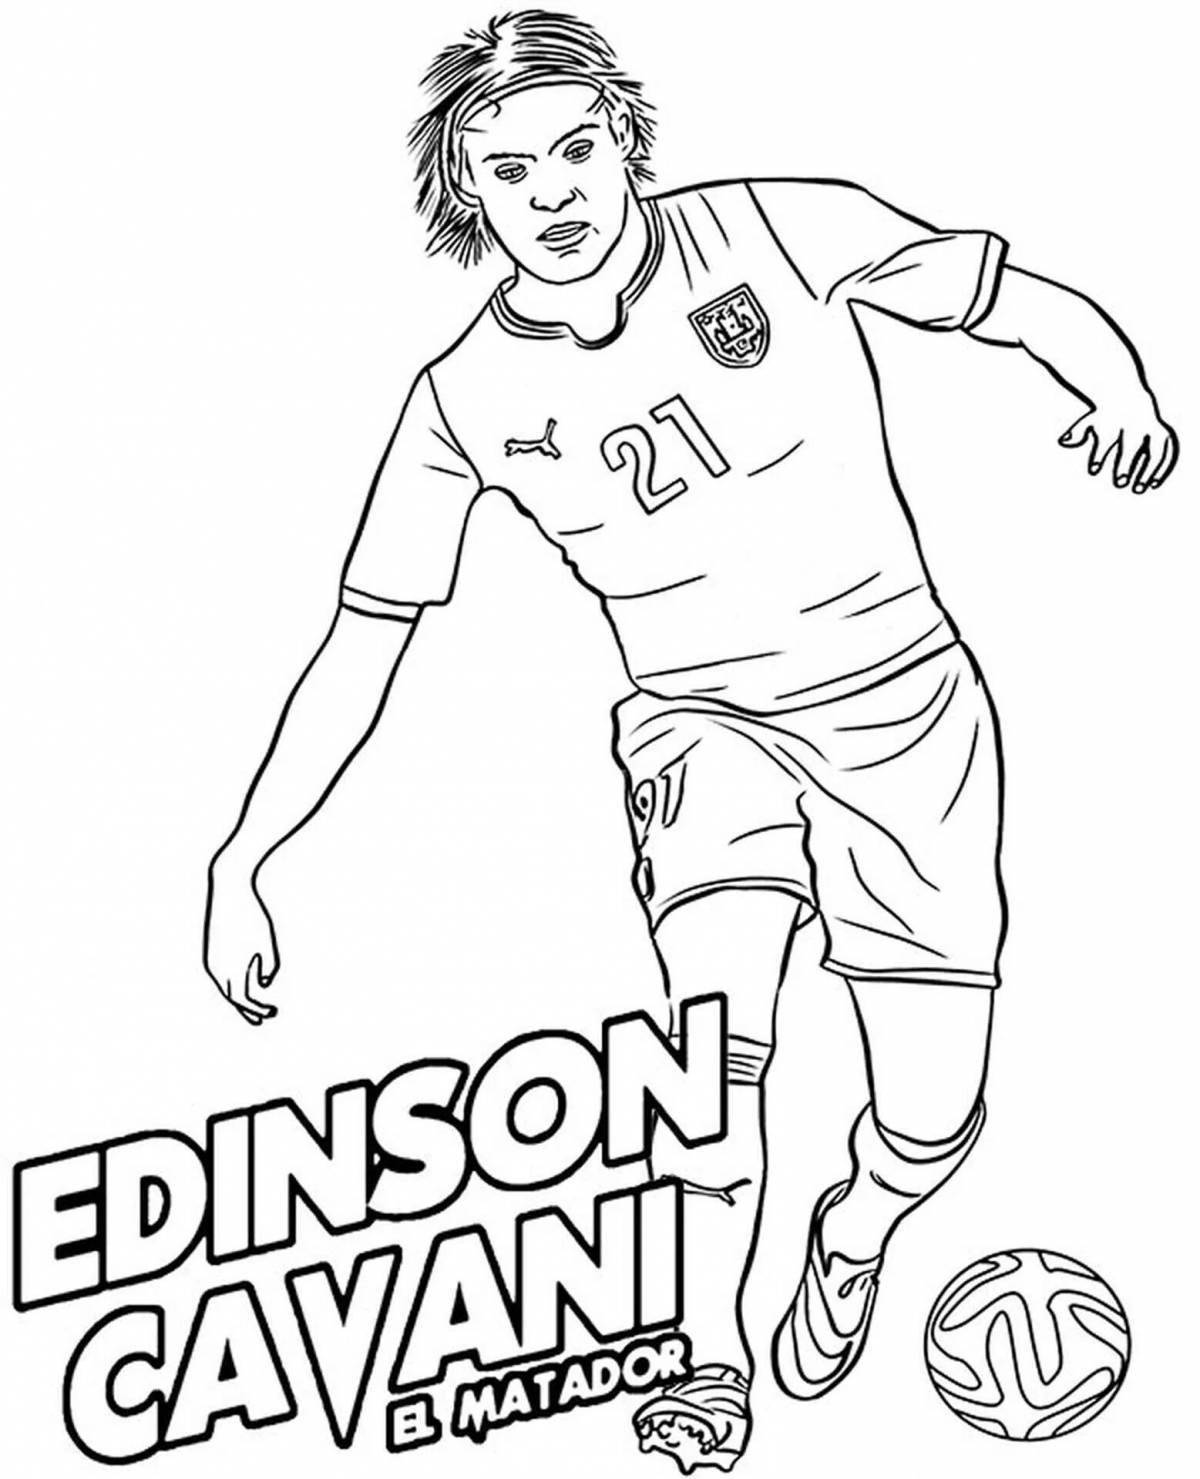 Attractive coloring book with famous football players